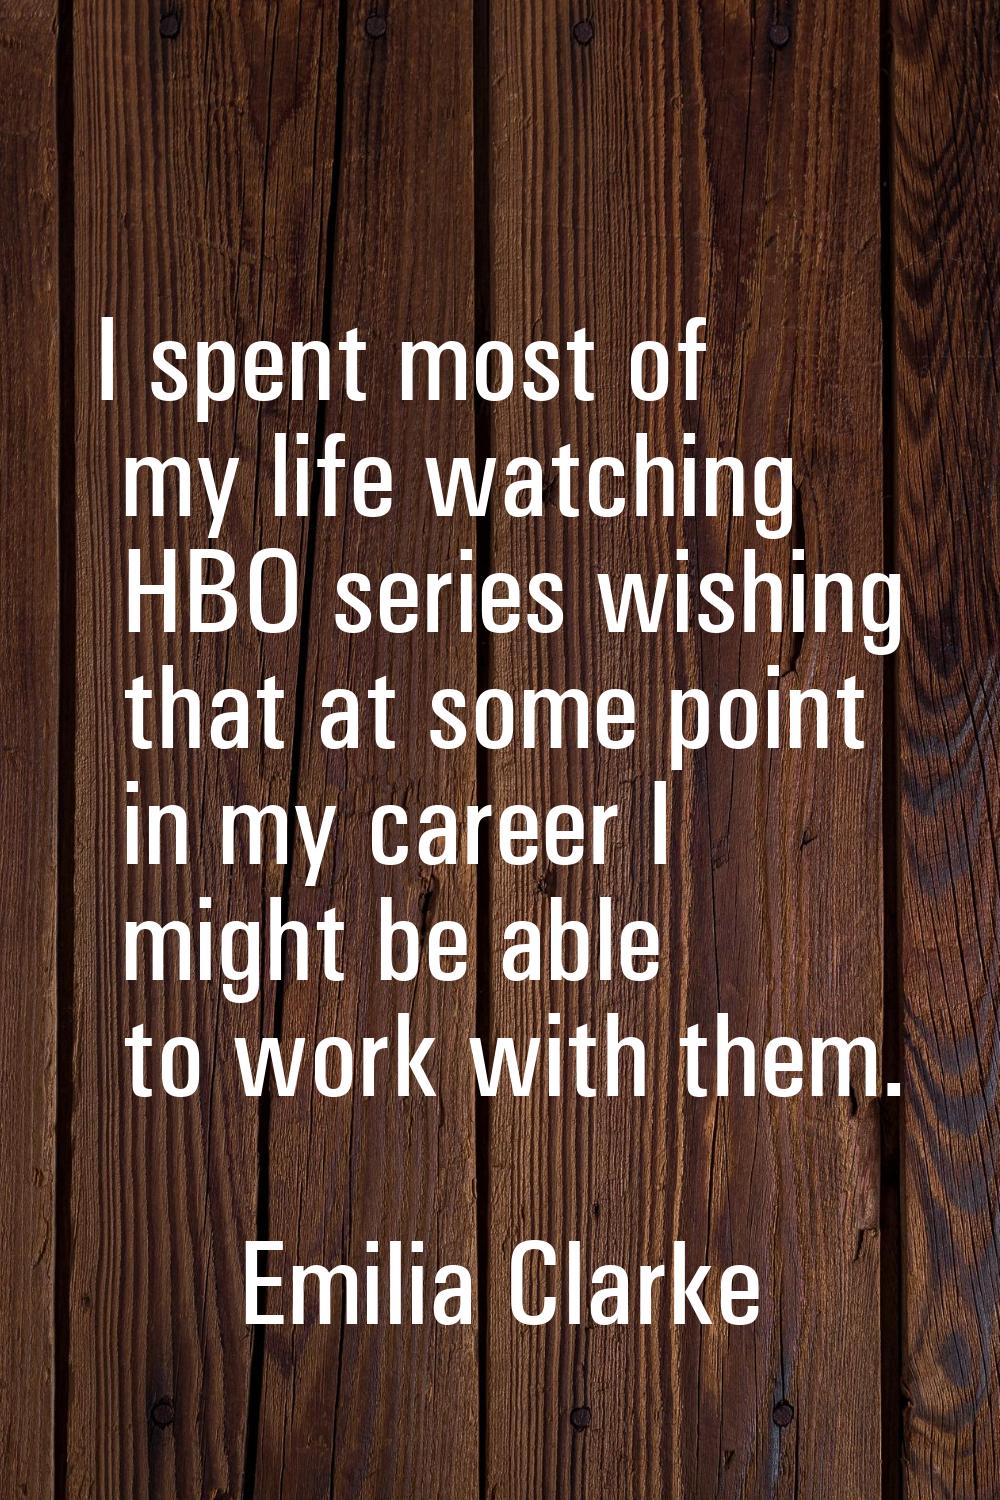 I spent most of my life watching HBO series wishing that at some point in my career I might be able